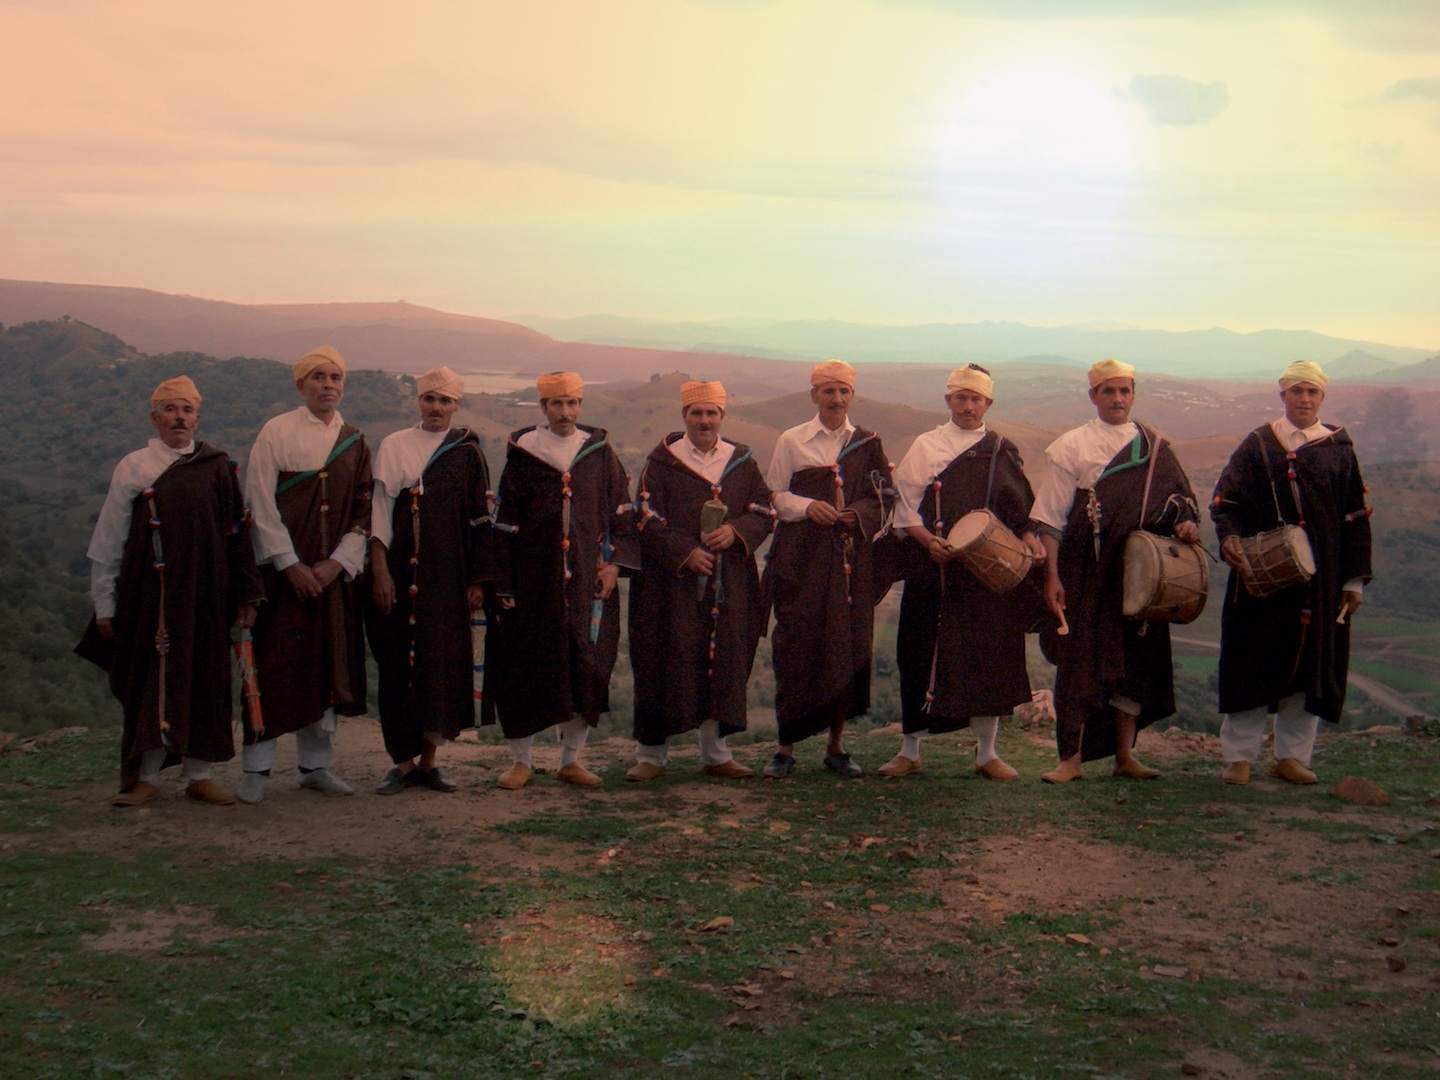 The Master Musicians Of Joujouka to perform live in Marrakech for 50th anniversary image